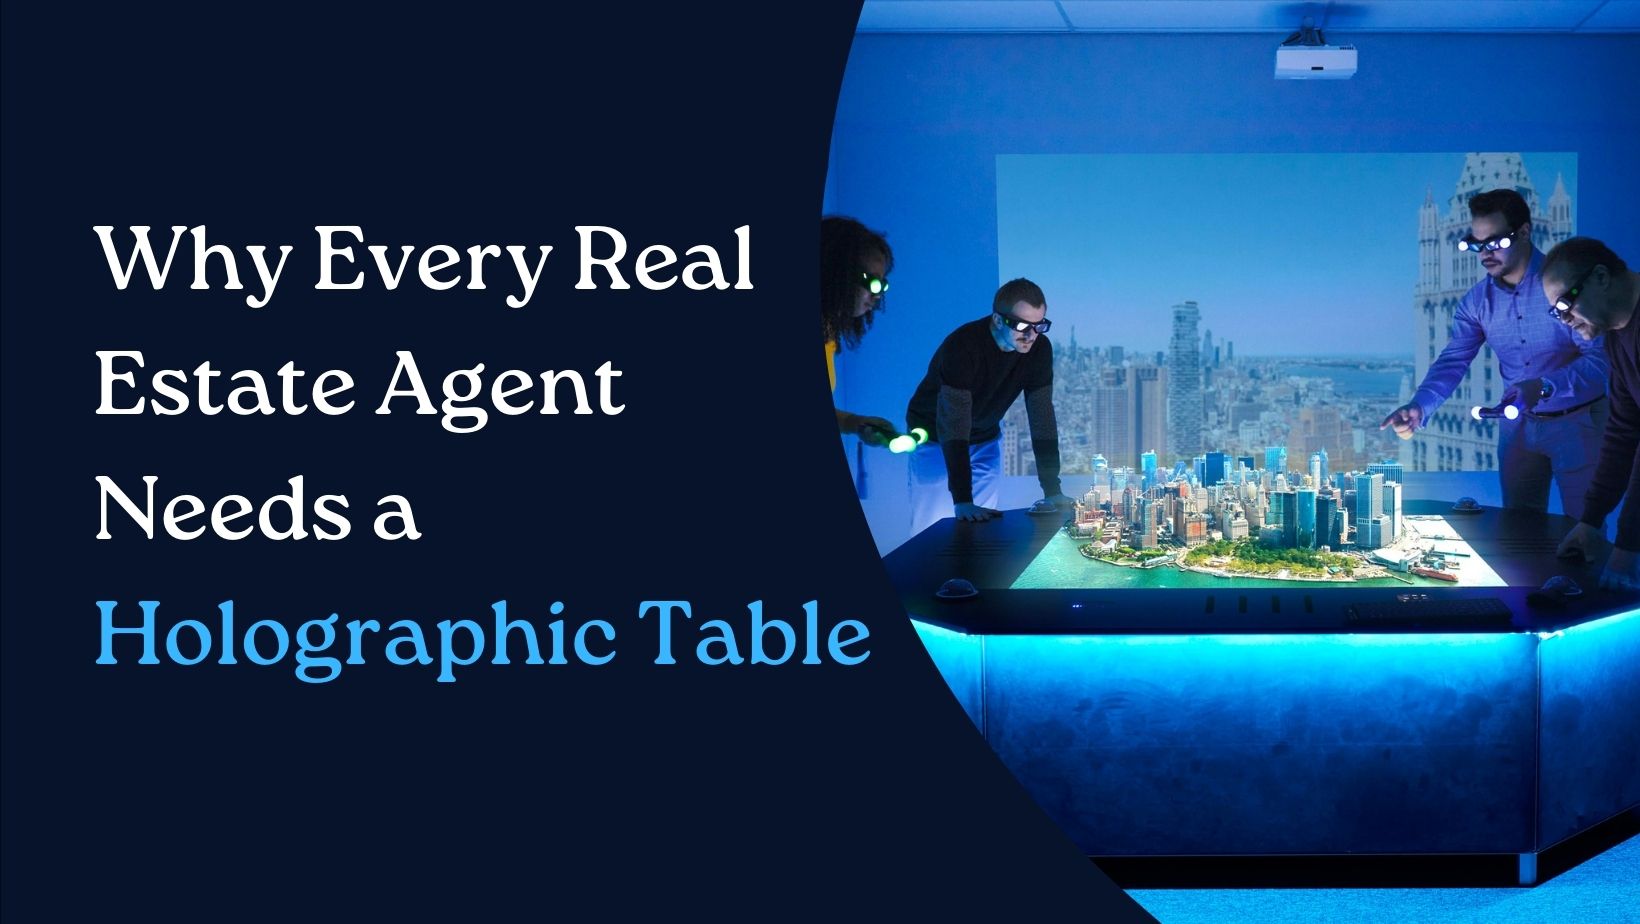 Why Does Every Real Estate Agent Need a Holographic Table?